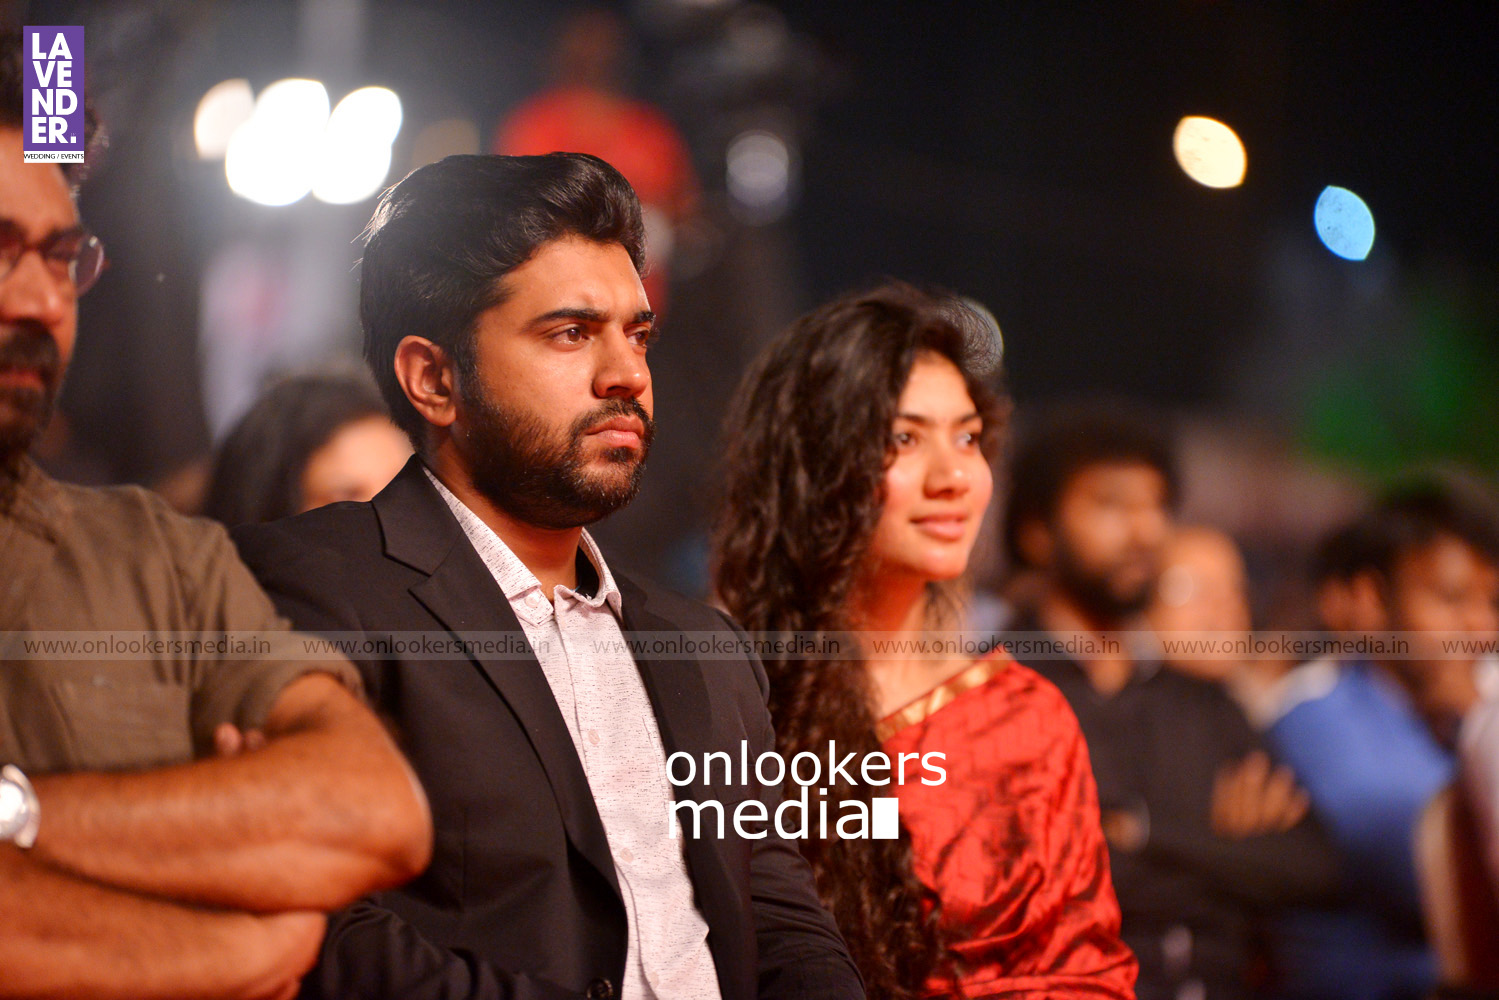 https://onlookersmedia.in/wp-content/uploads/2016/02/Nivin-Pauly-at-Asianet-Film-Award-2016-2.jpg